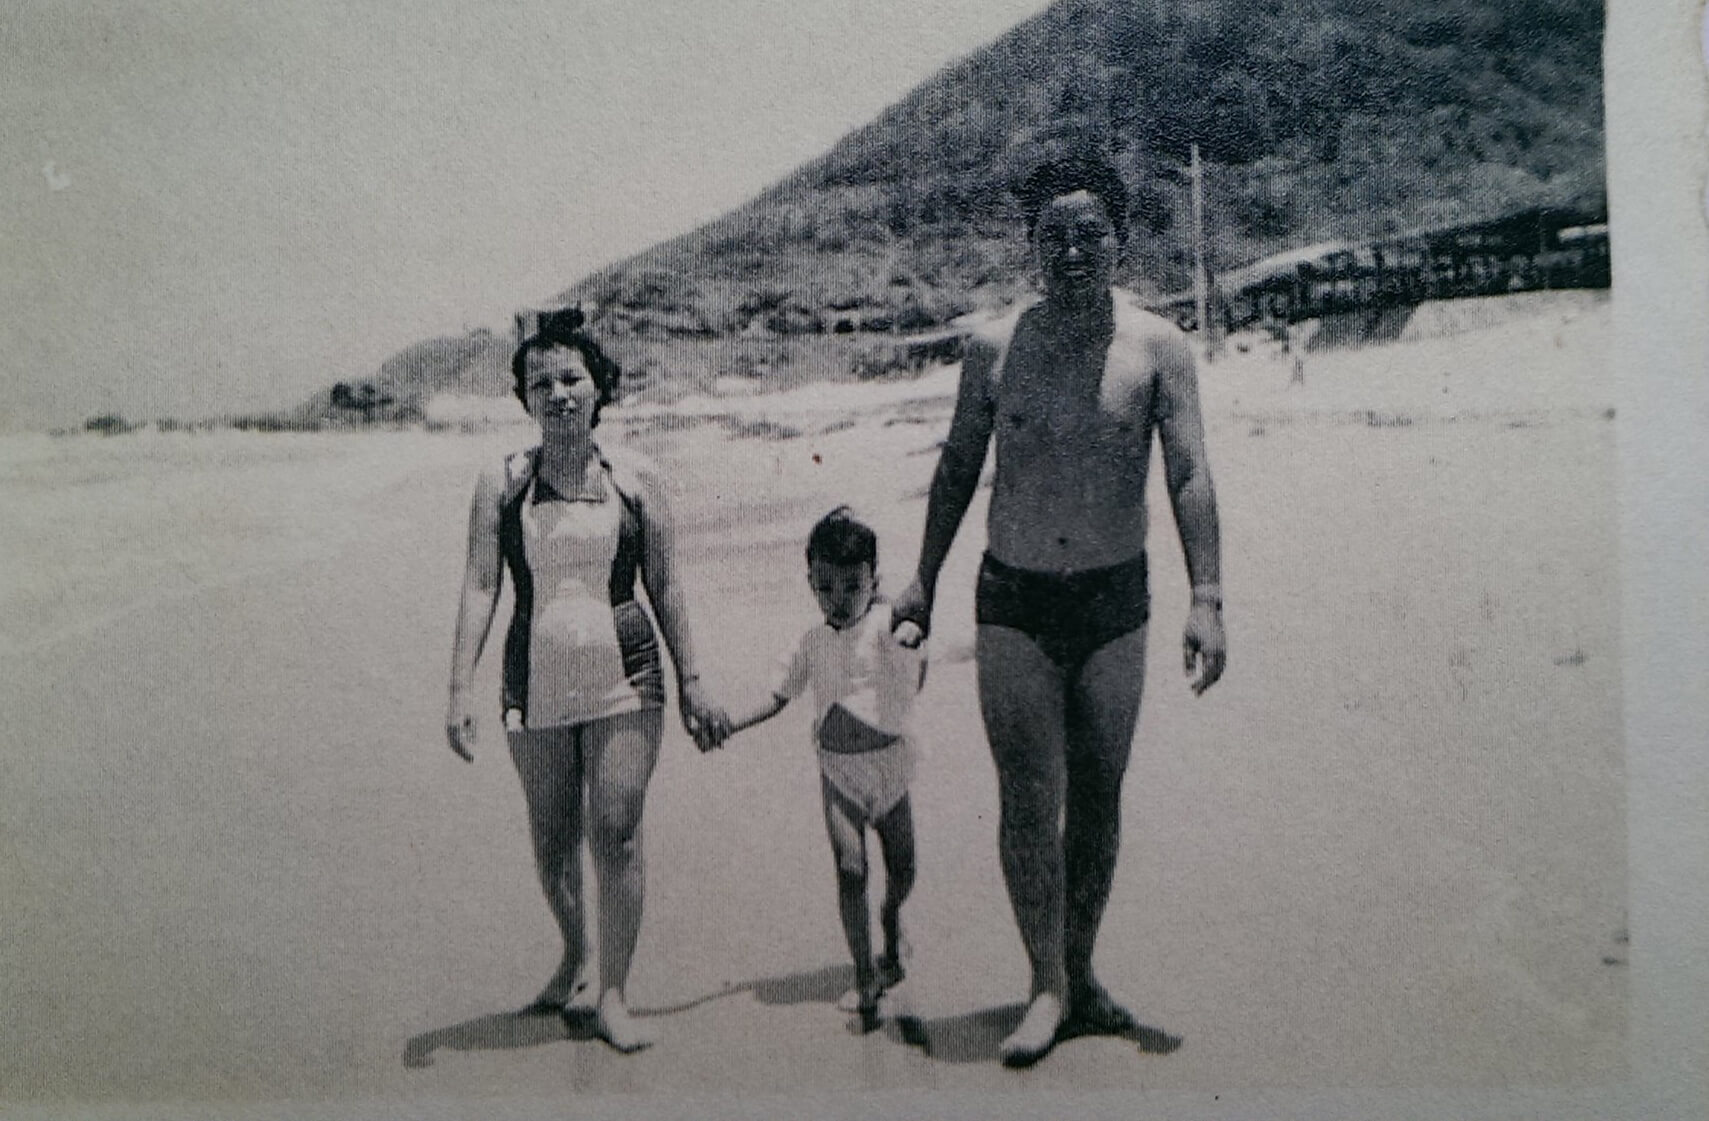 Black and white photo of three Vietnamese people walking on a beach.